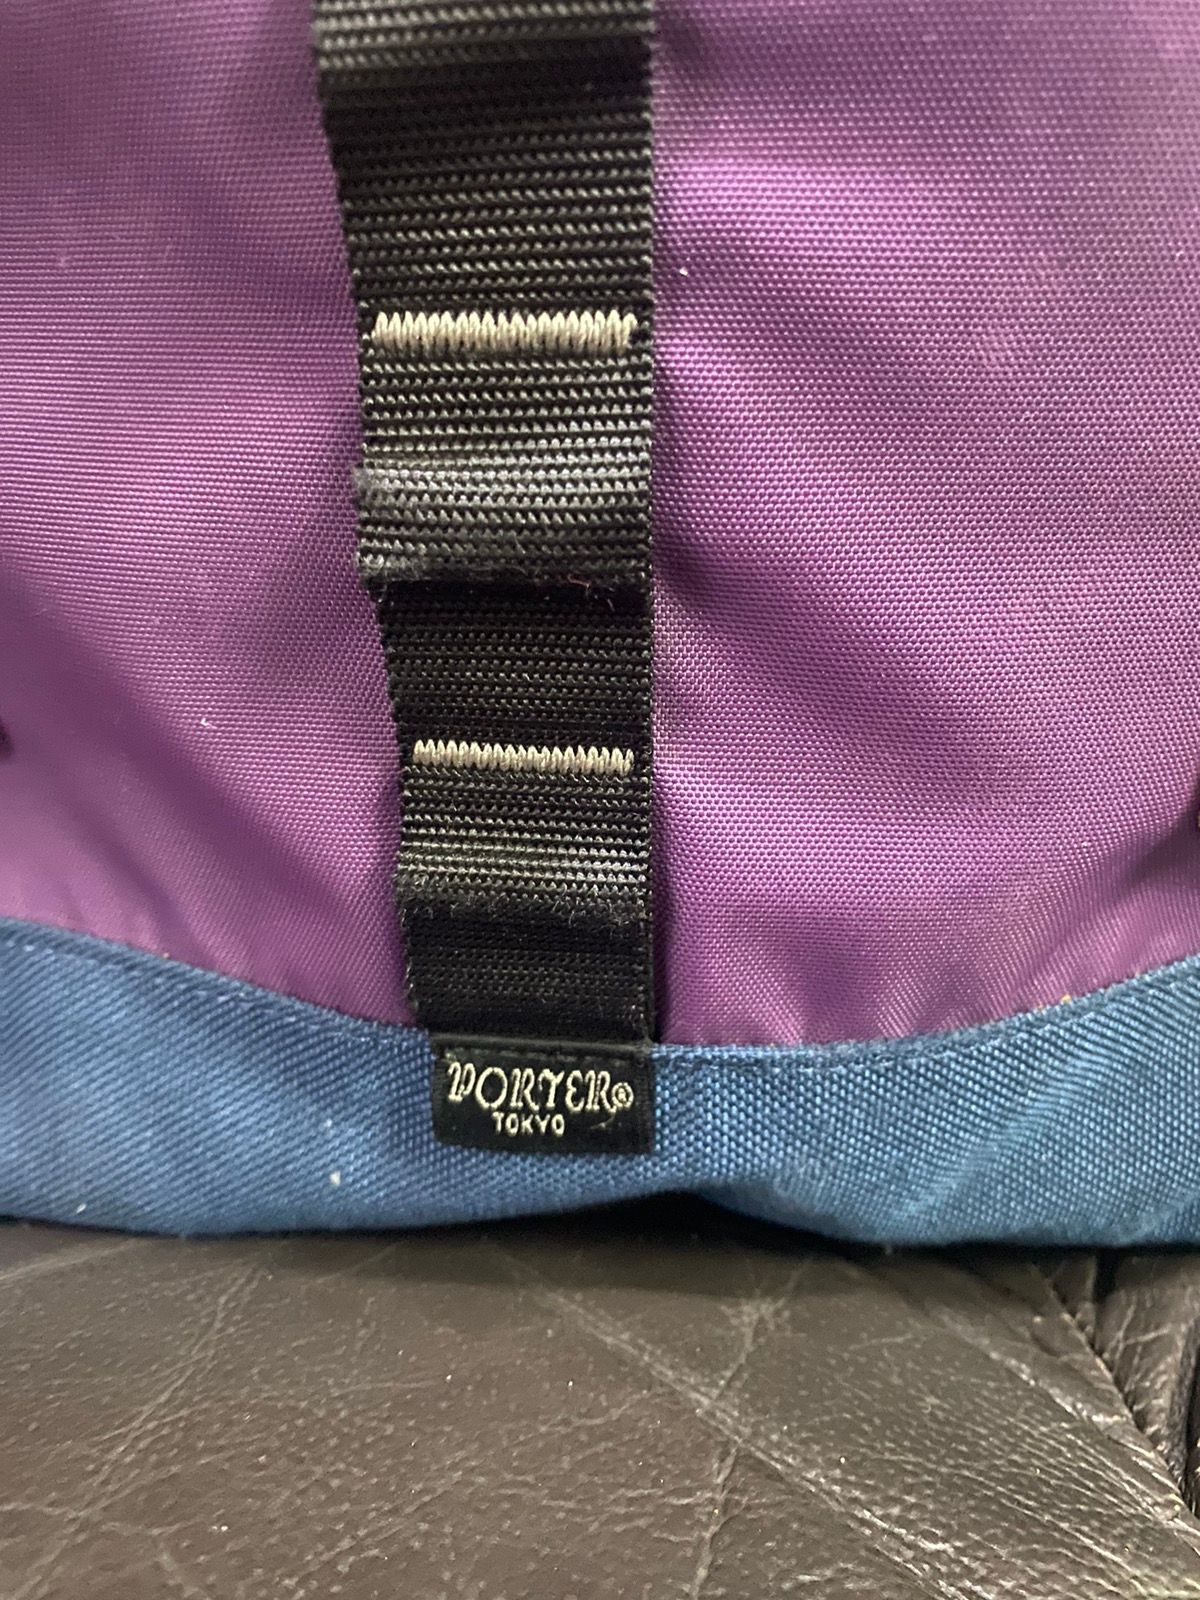 Authentic Porter Purple Hiking Backpack - 6